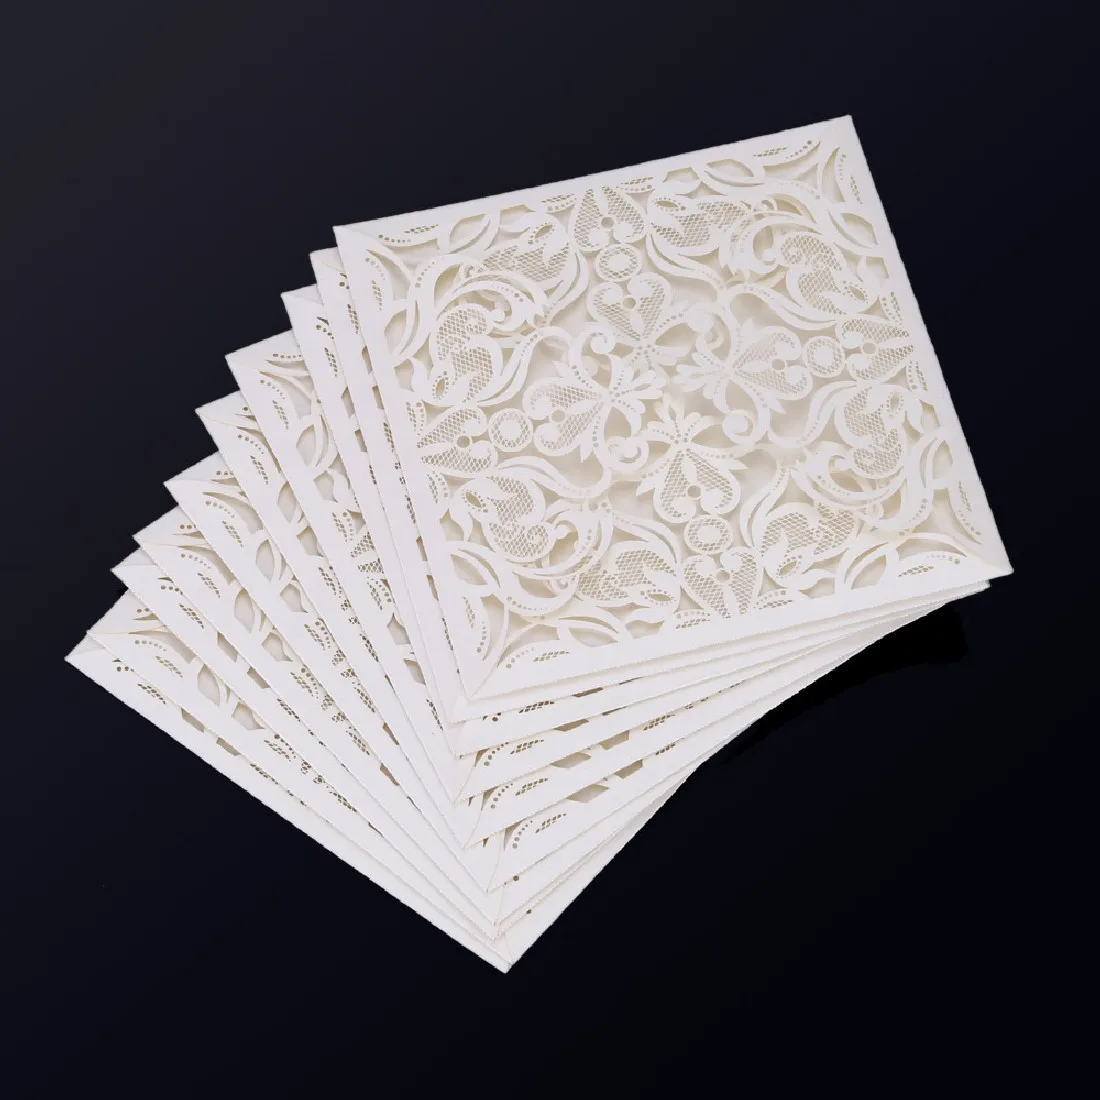 Image 10Pcs set Romantic Wedding Party Event Invitation Card Birthday Business Party Invitation Cards Envelope Delicate Carved Pattern